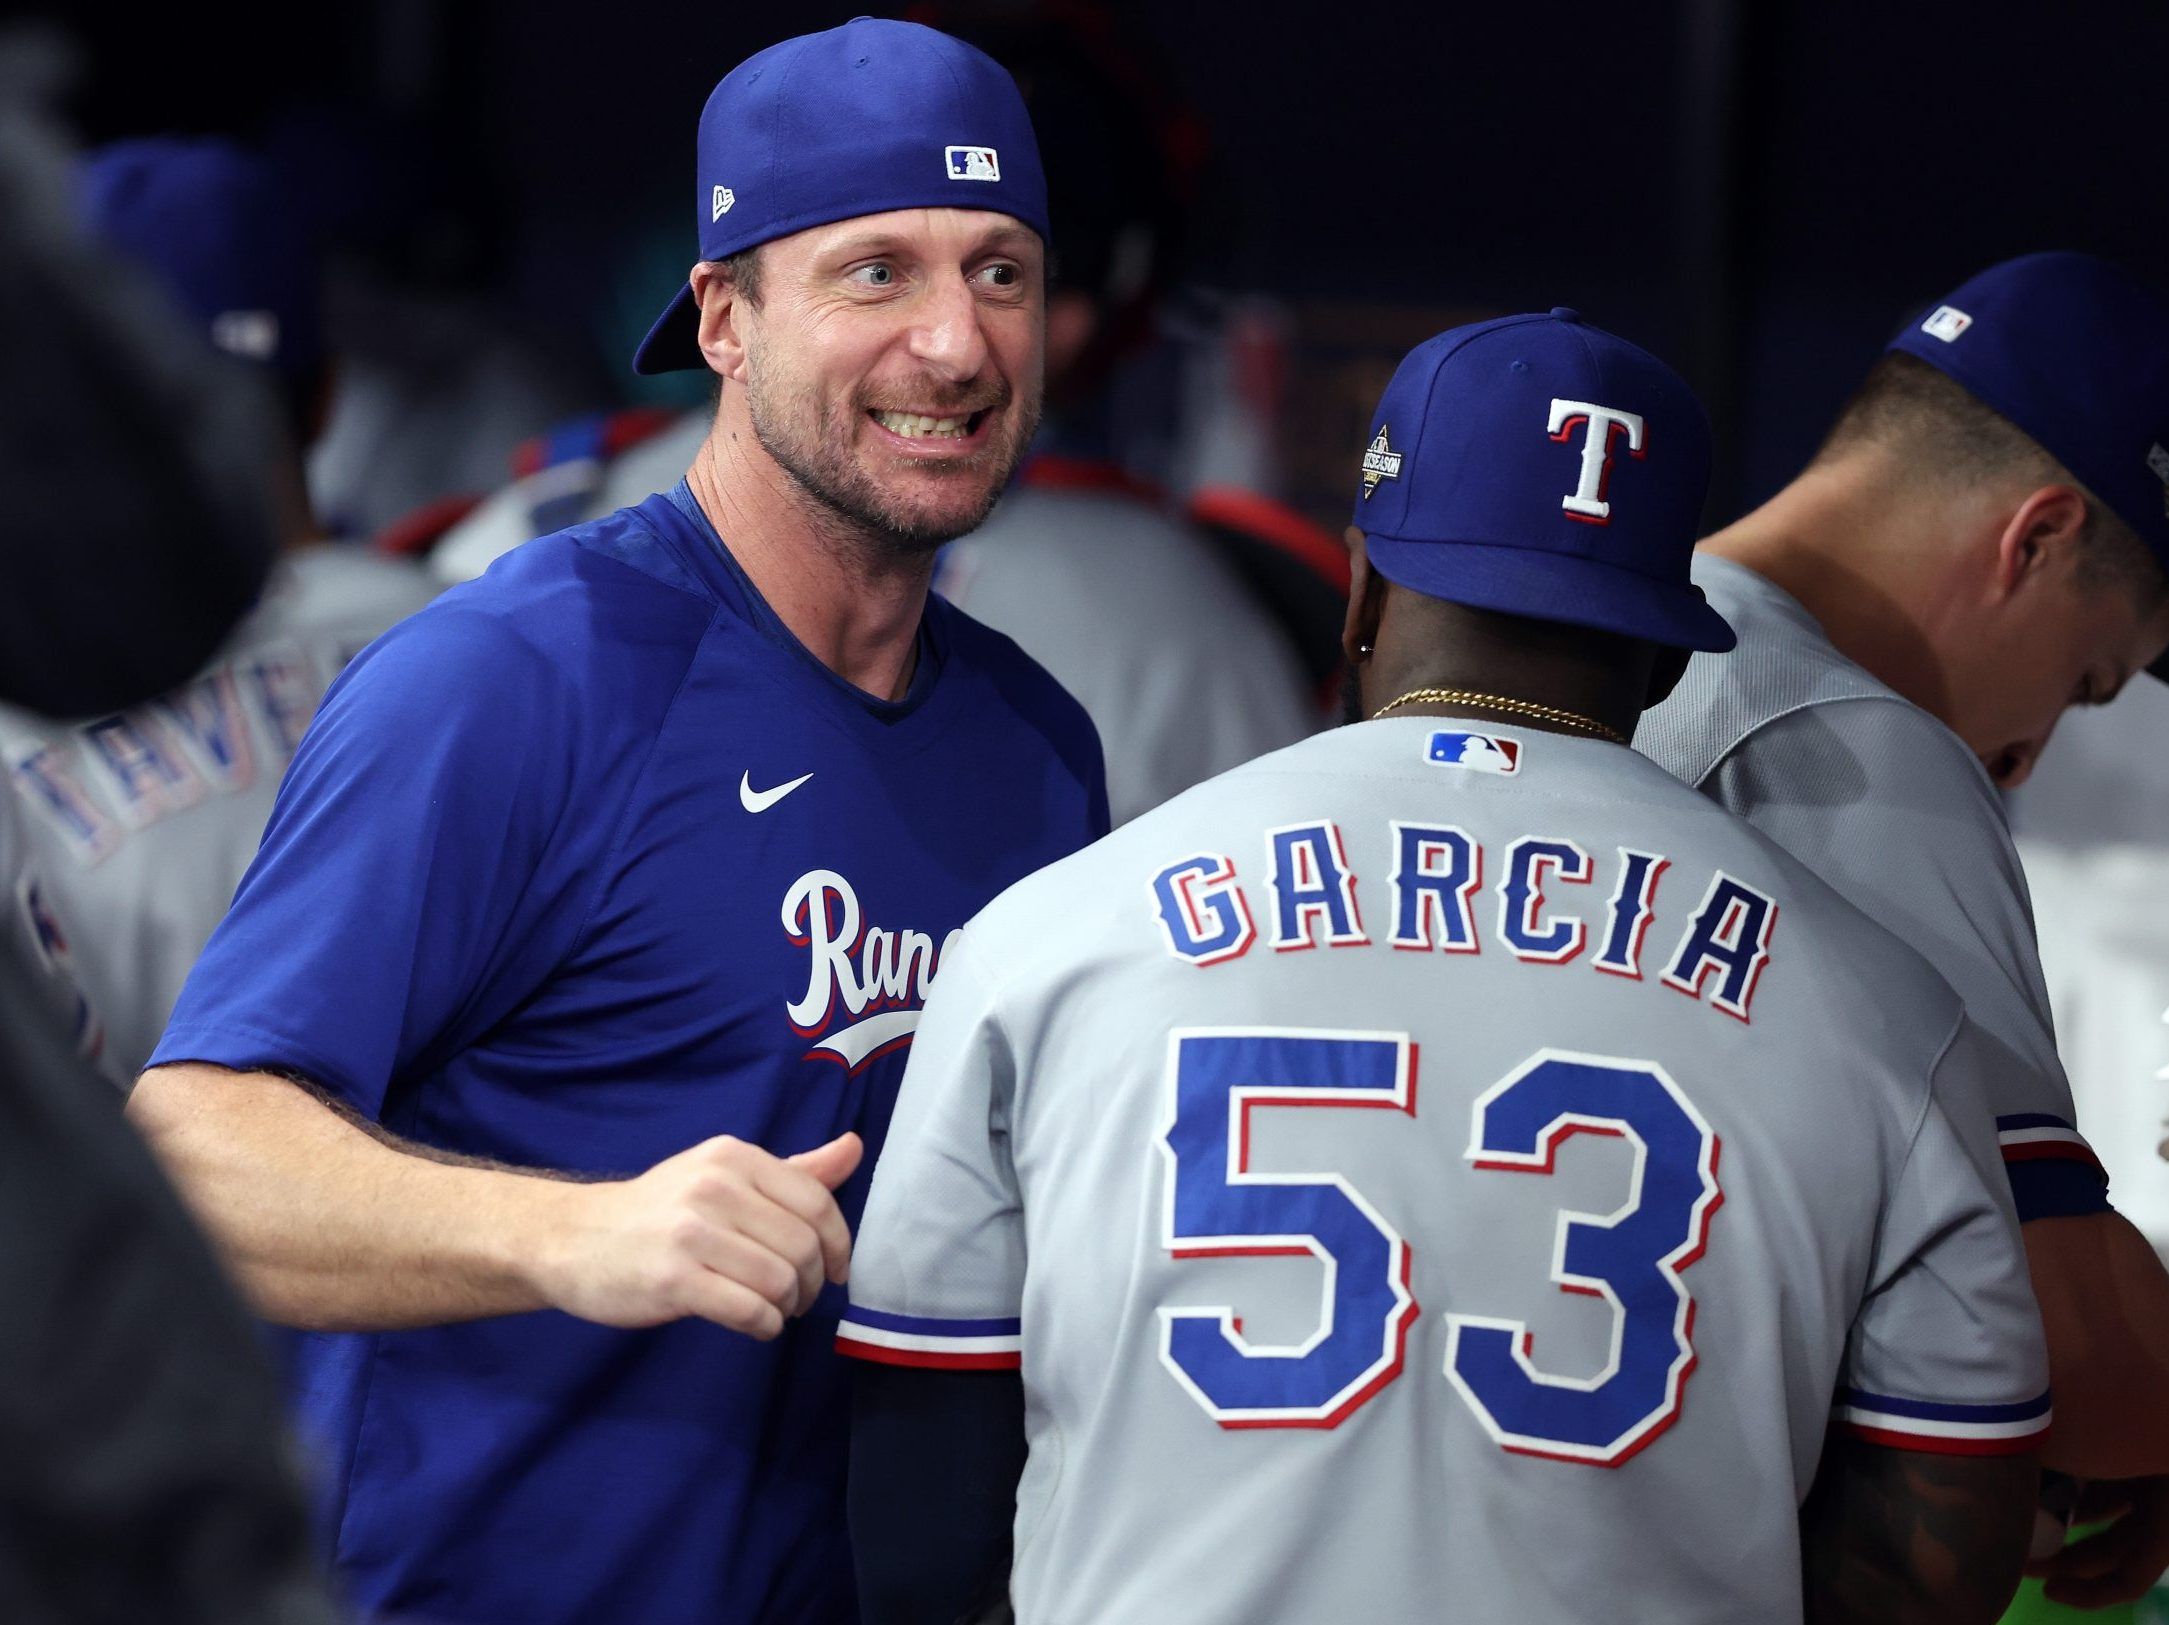 Max Scherzer says he's 'ready to go' for Rangers in ALCS, Sports